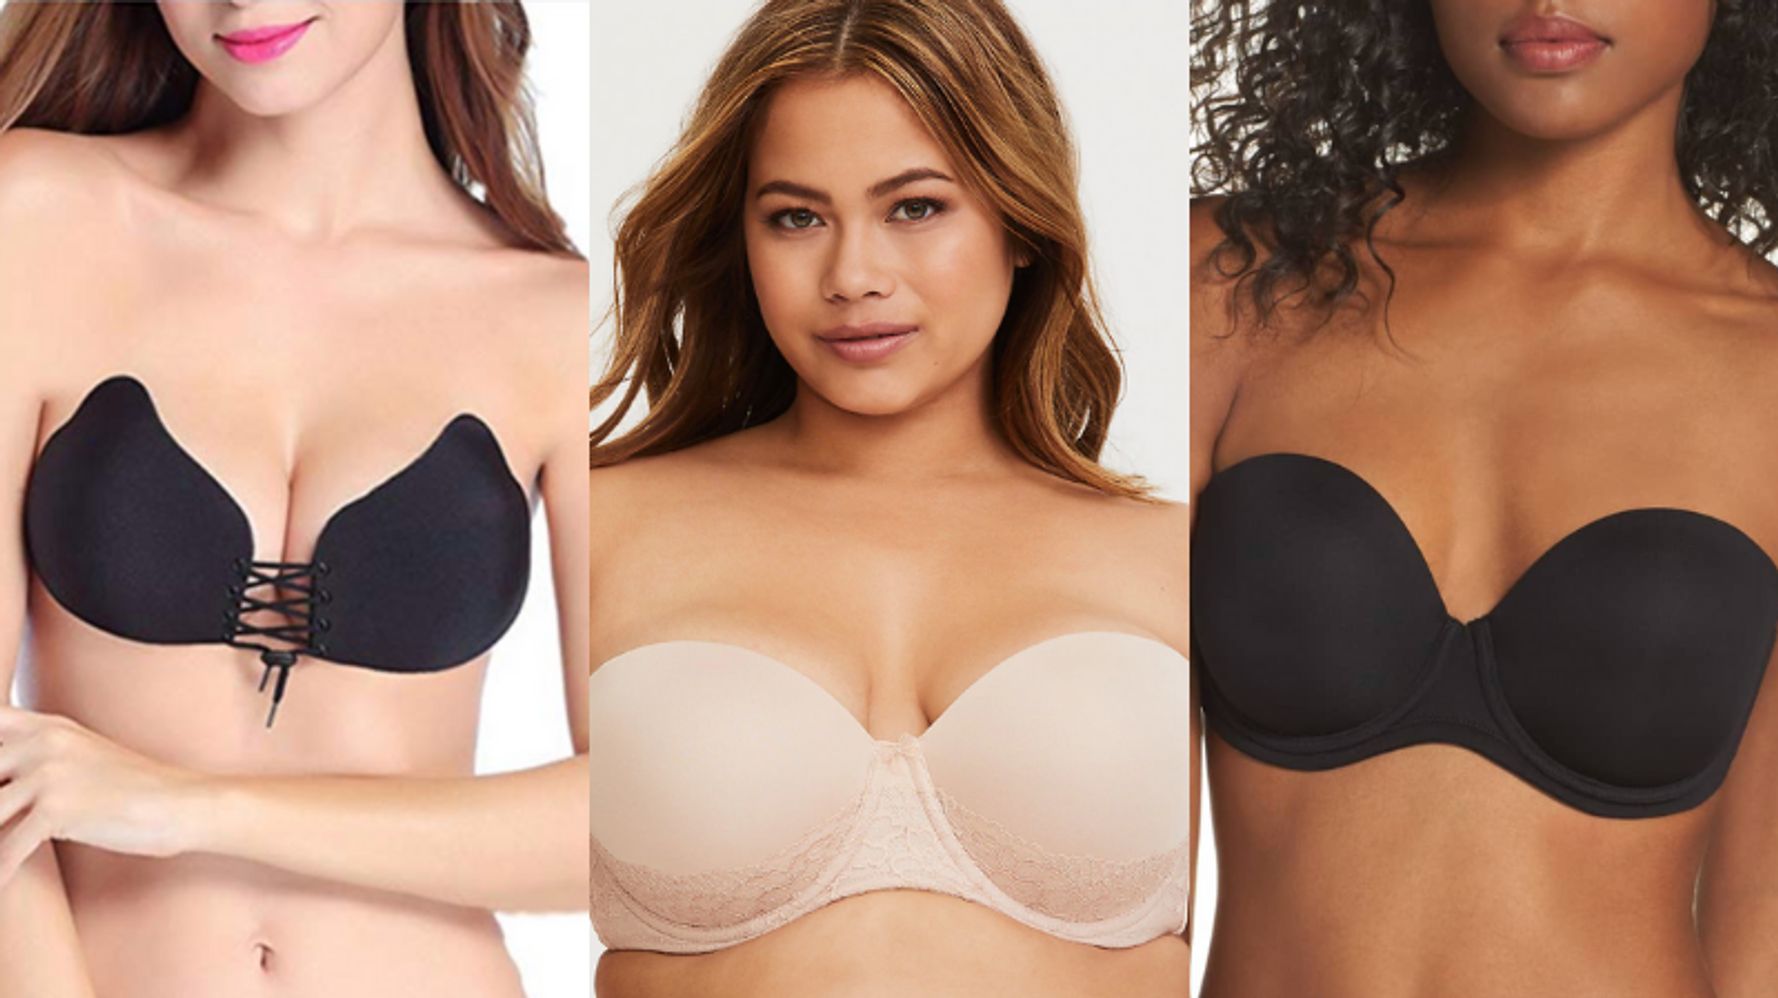 Luxury Strapless Bras, Underwire, Supportive & Backless